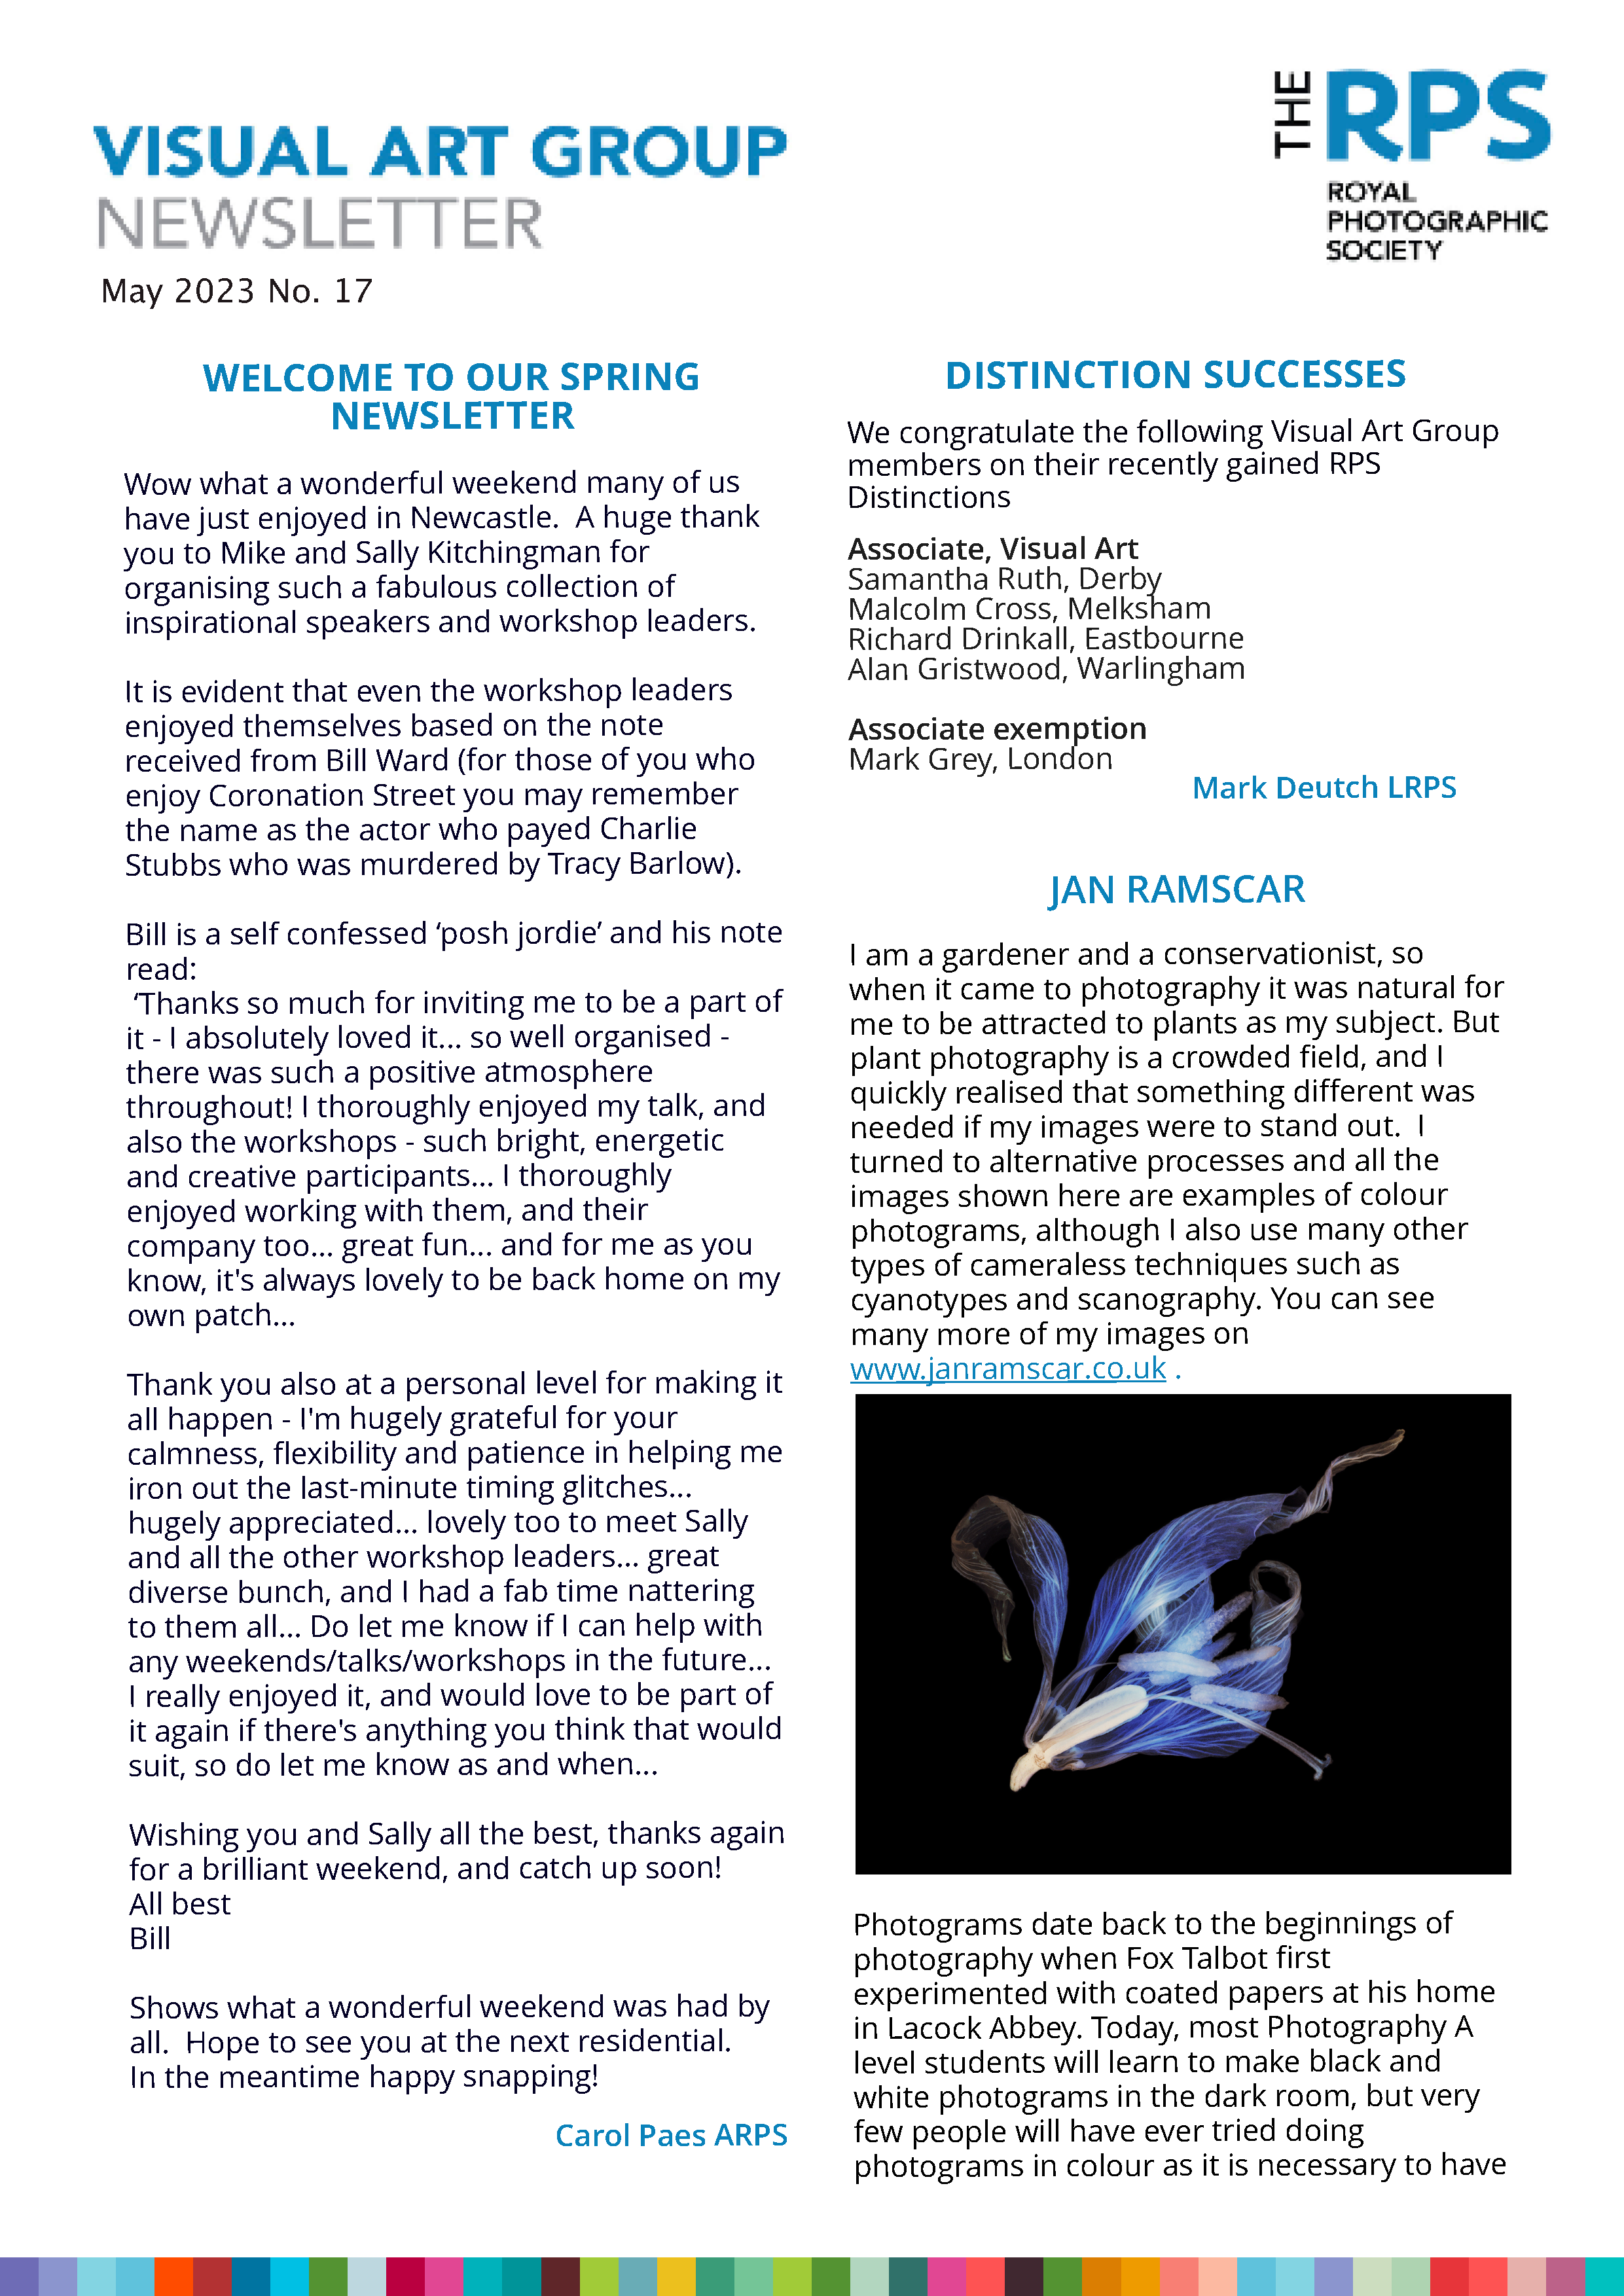 Visual Art Group Newsletter 17 May 2023